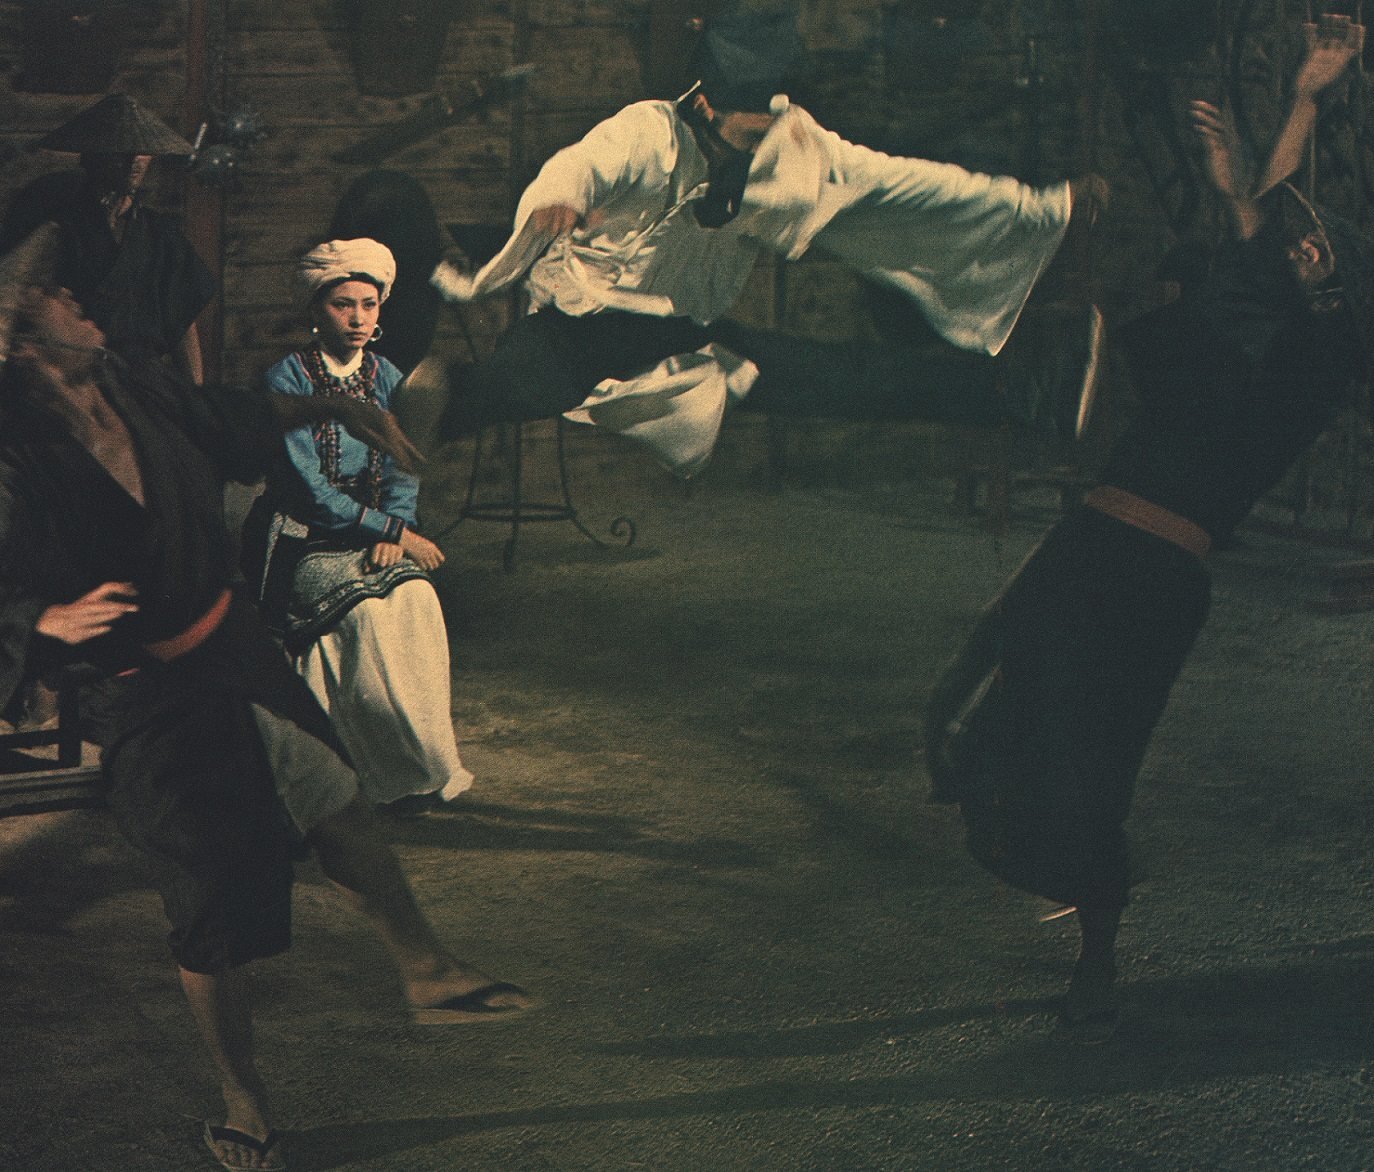 A still from The Valiant Ones. King Hu’s 1975 martial arts drama spent two decades “lost” before being rediscovered. A film critic tells the Post why the movie stands out among the maestro’s other films. Photo: King Hu Foundation